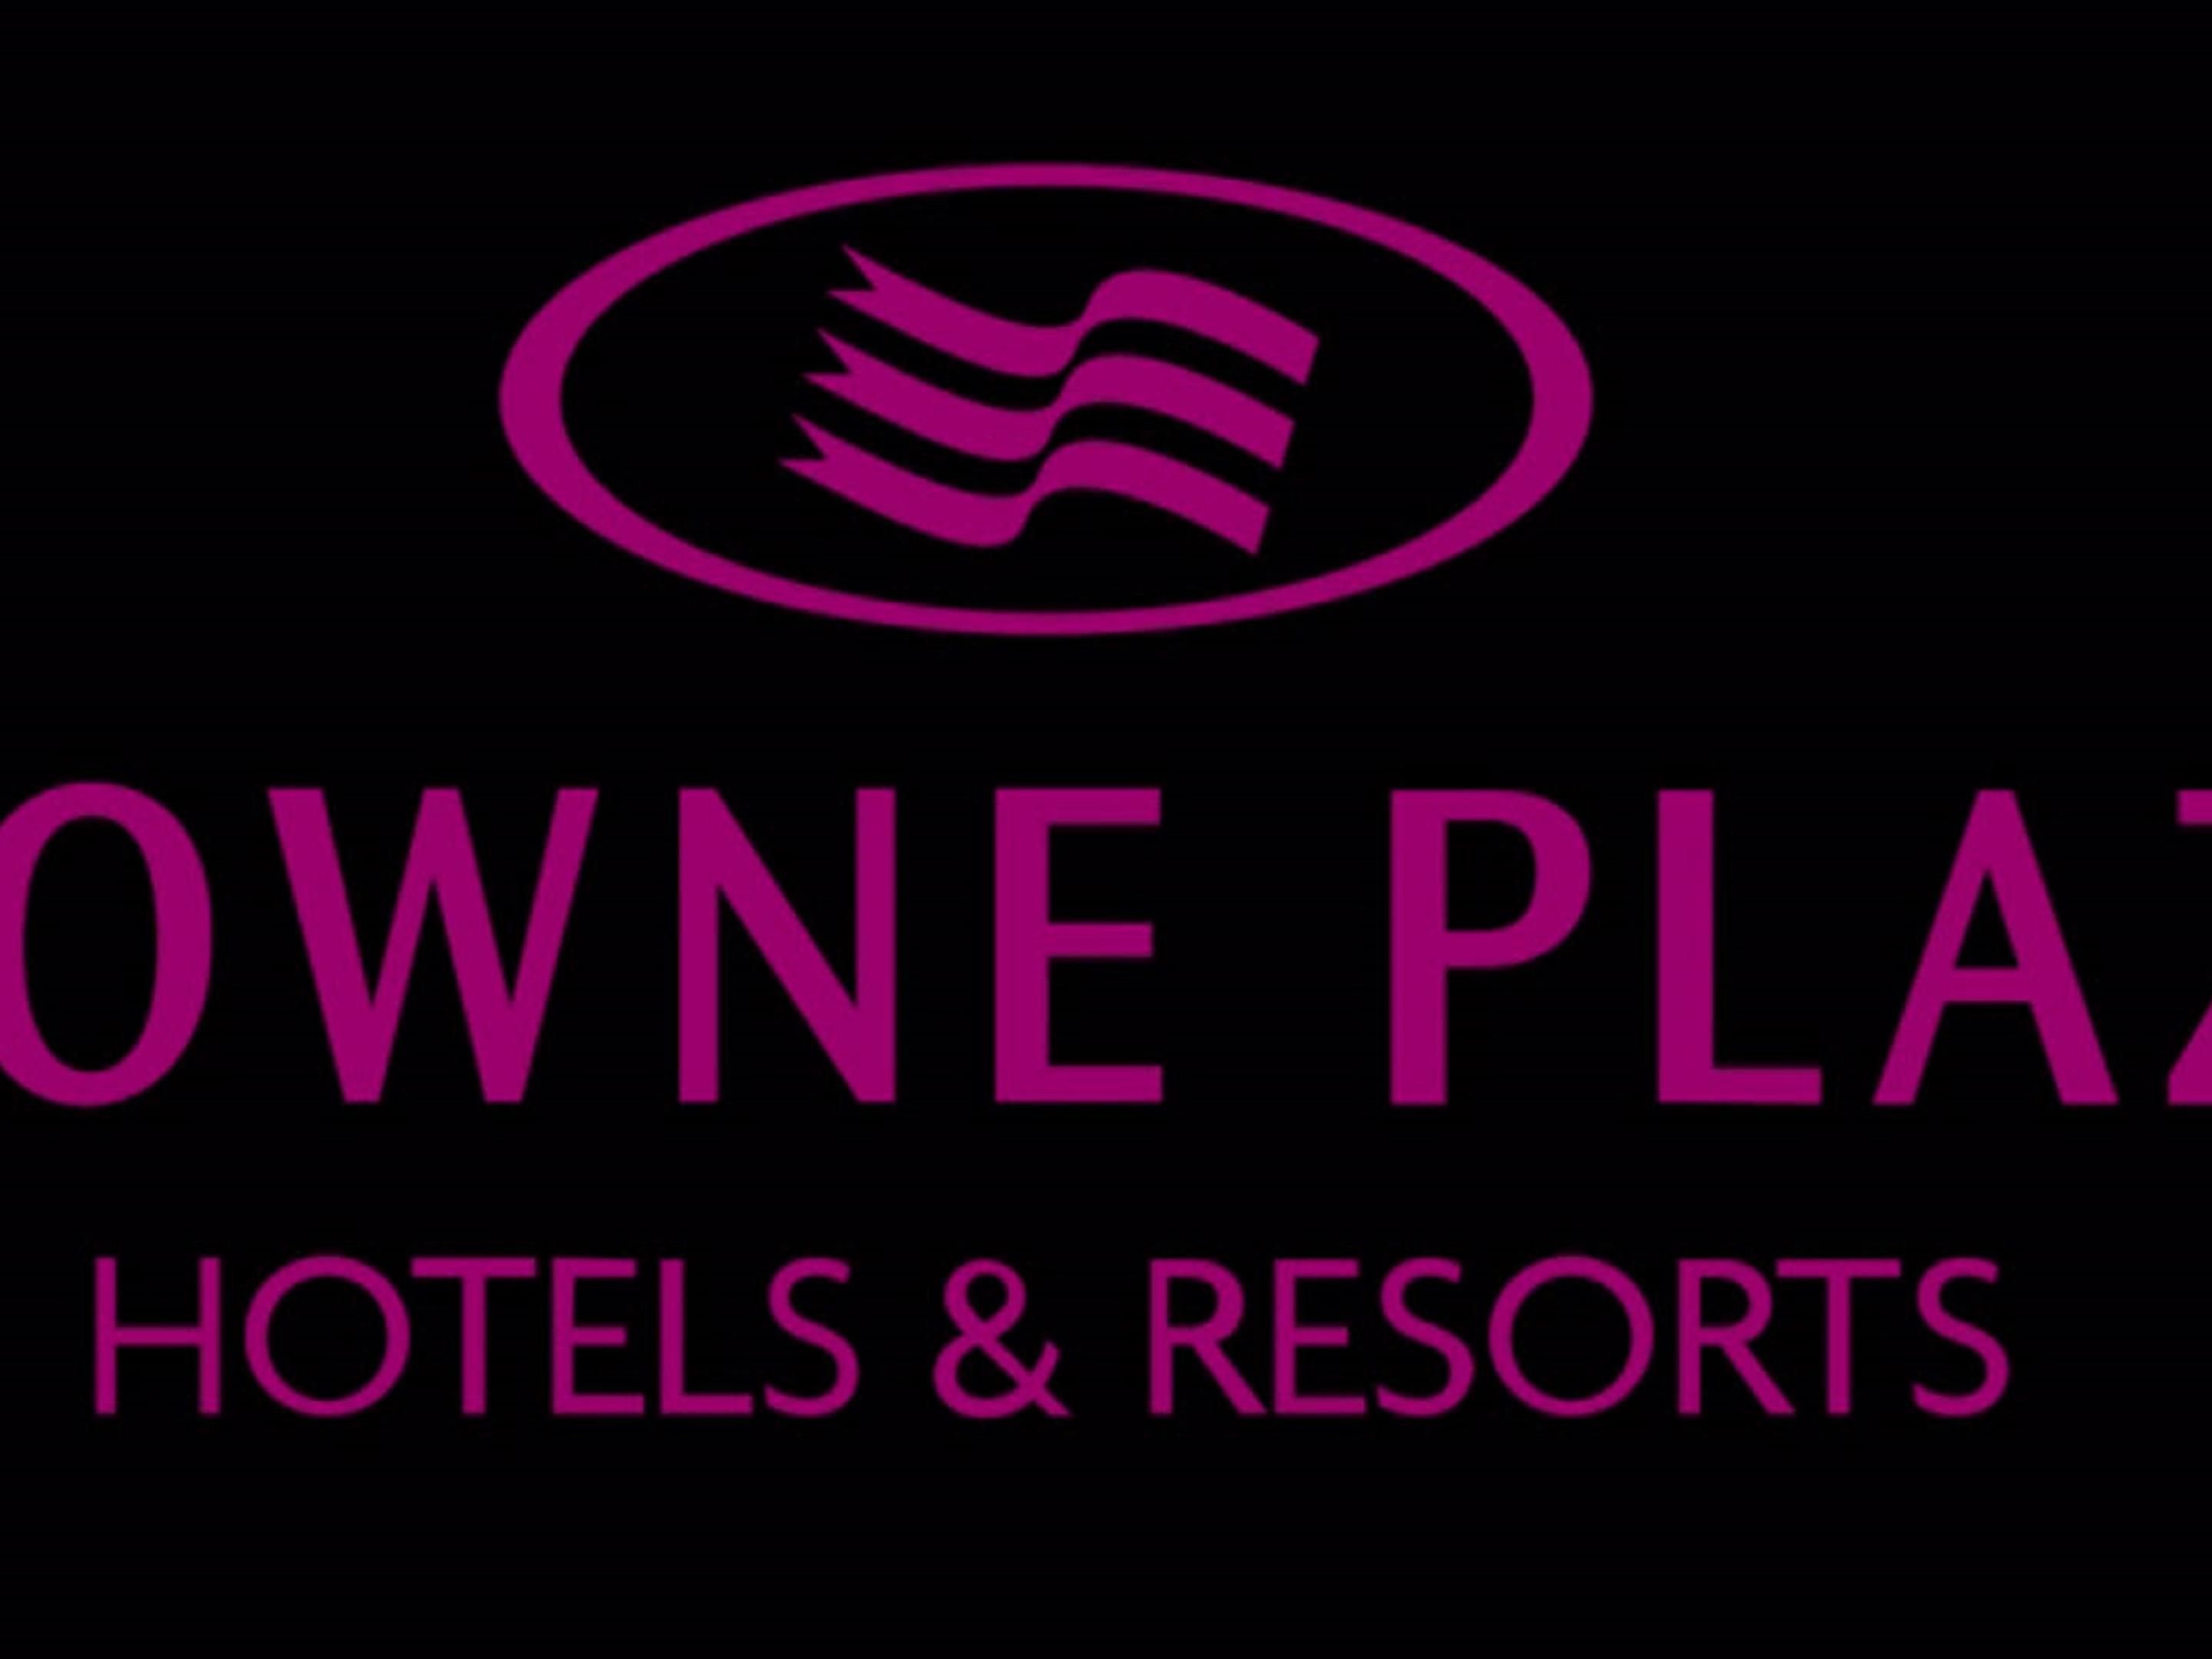 We have made a short video of the Beautiful Crowne Plaza Charleston to show you the extra measures we are taking to keep you safe in this unprecedented time. From changes in the way you check-in, your room, our restaurant, and even our banquet and meeting space. We have covered all of this in our short video. Hope to see you soon in Charleston, SC!